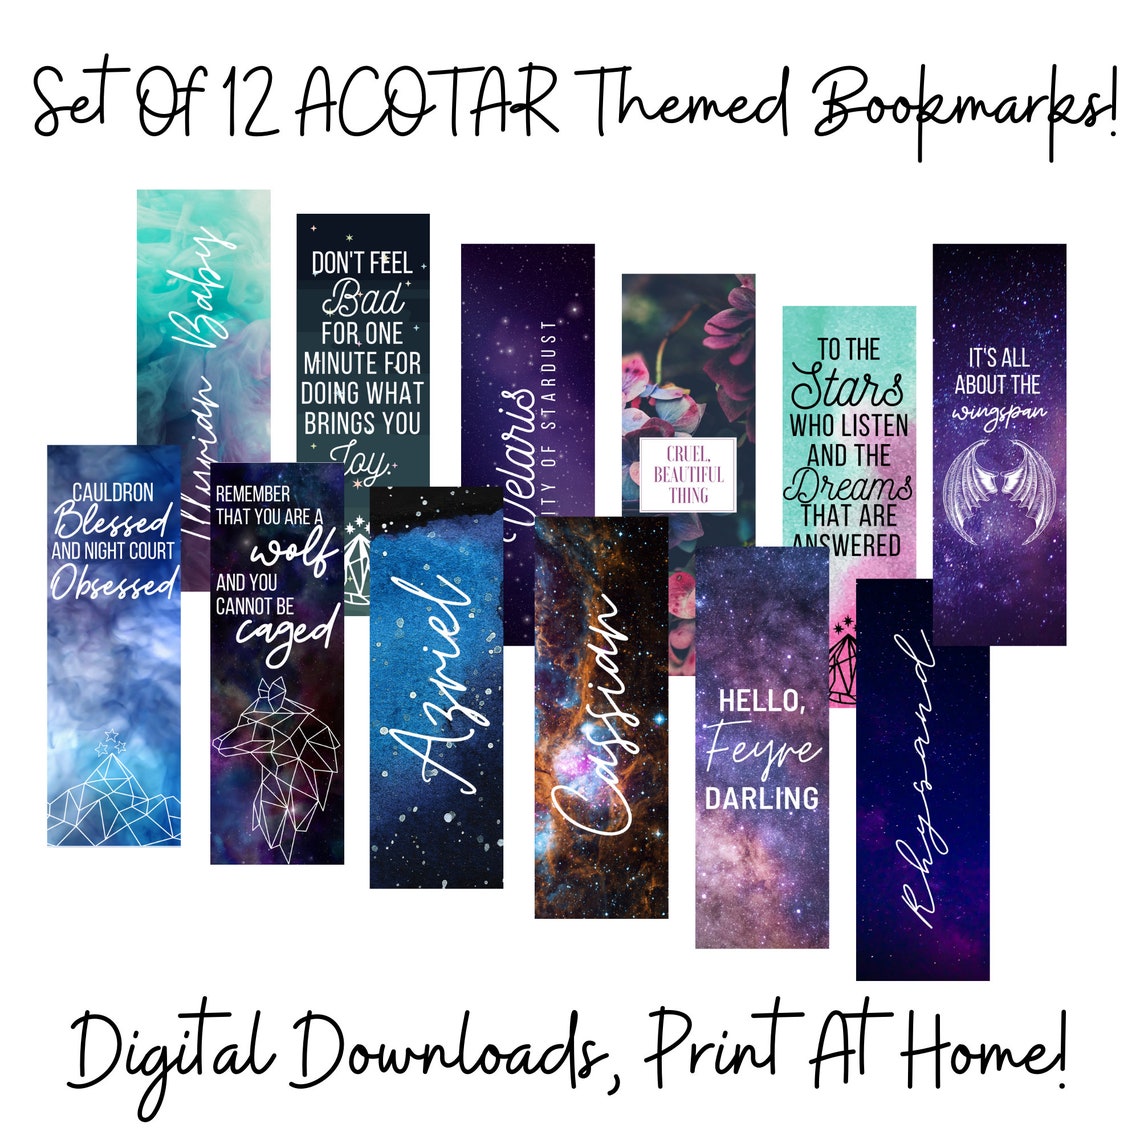 set-of-12-acotar-themed-bookmarks-printable-bookmarks-a-etsy